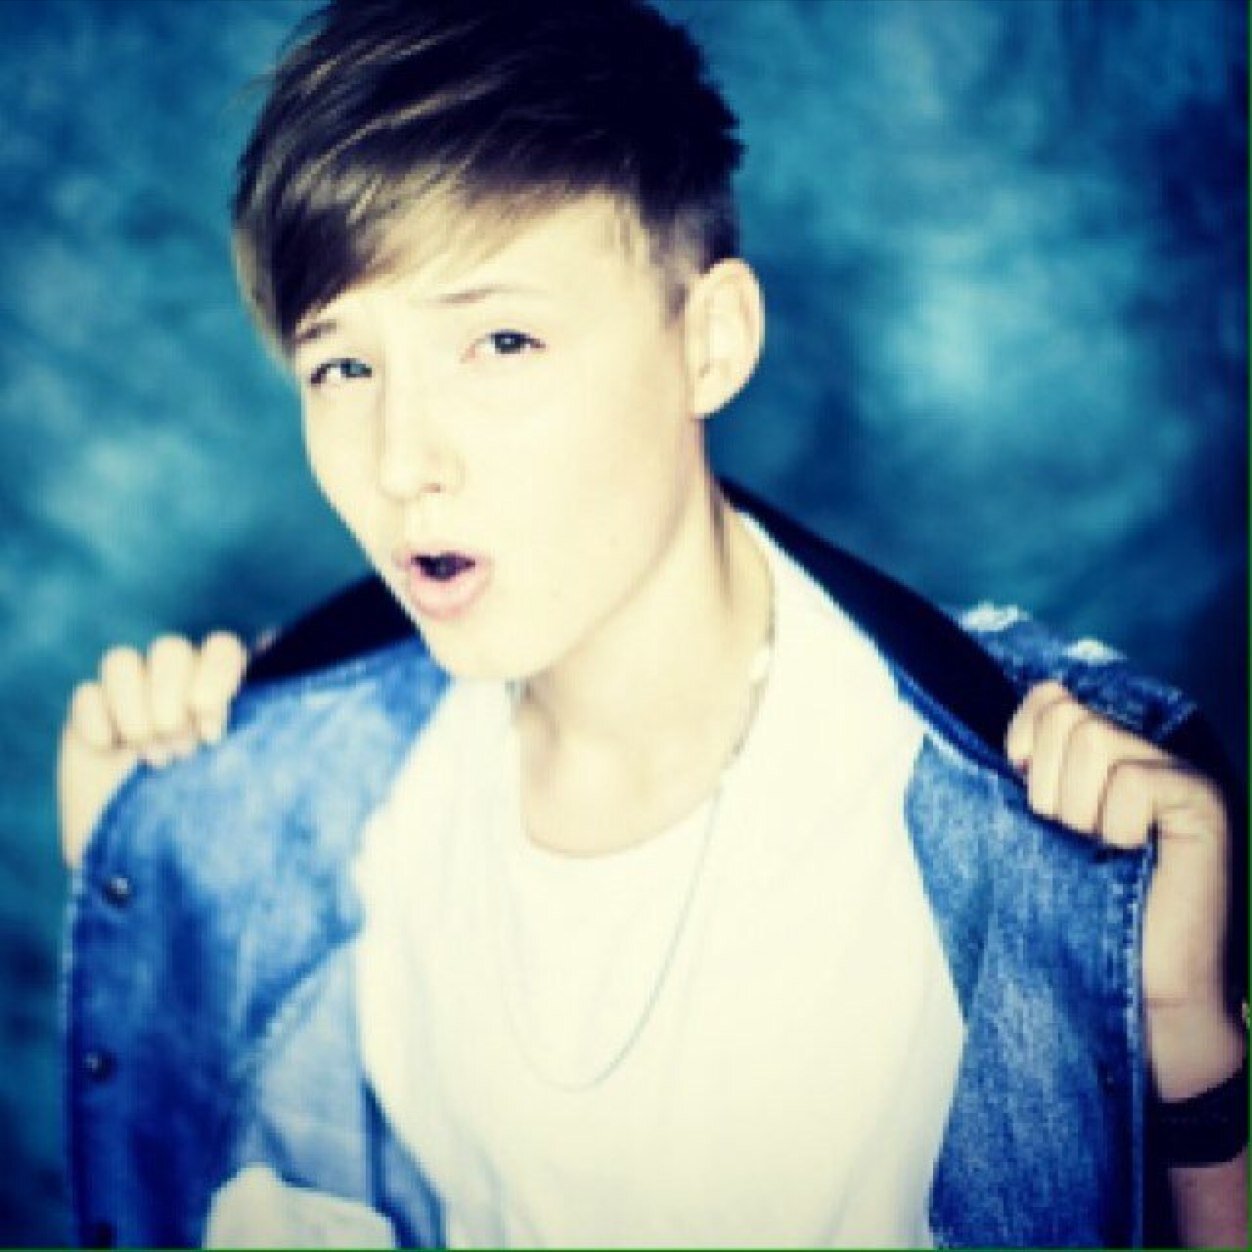 Isac elliot is my life! If he follows me it would mean everything!